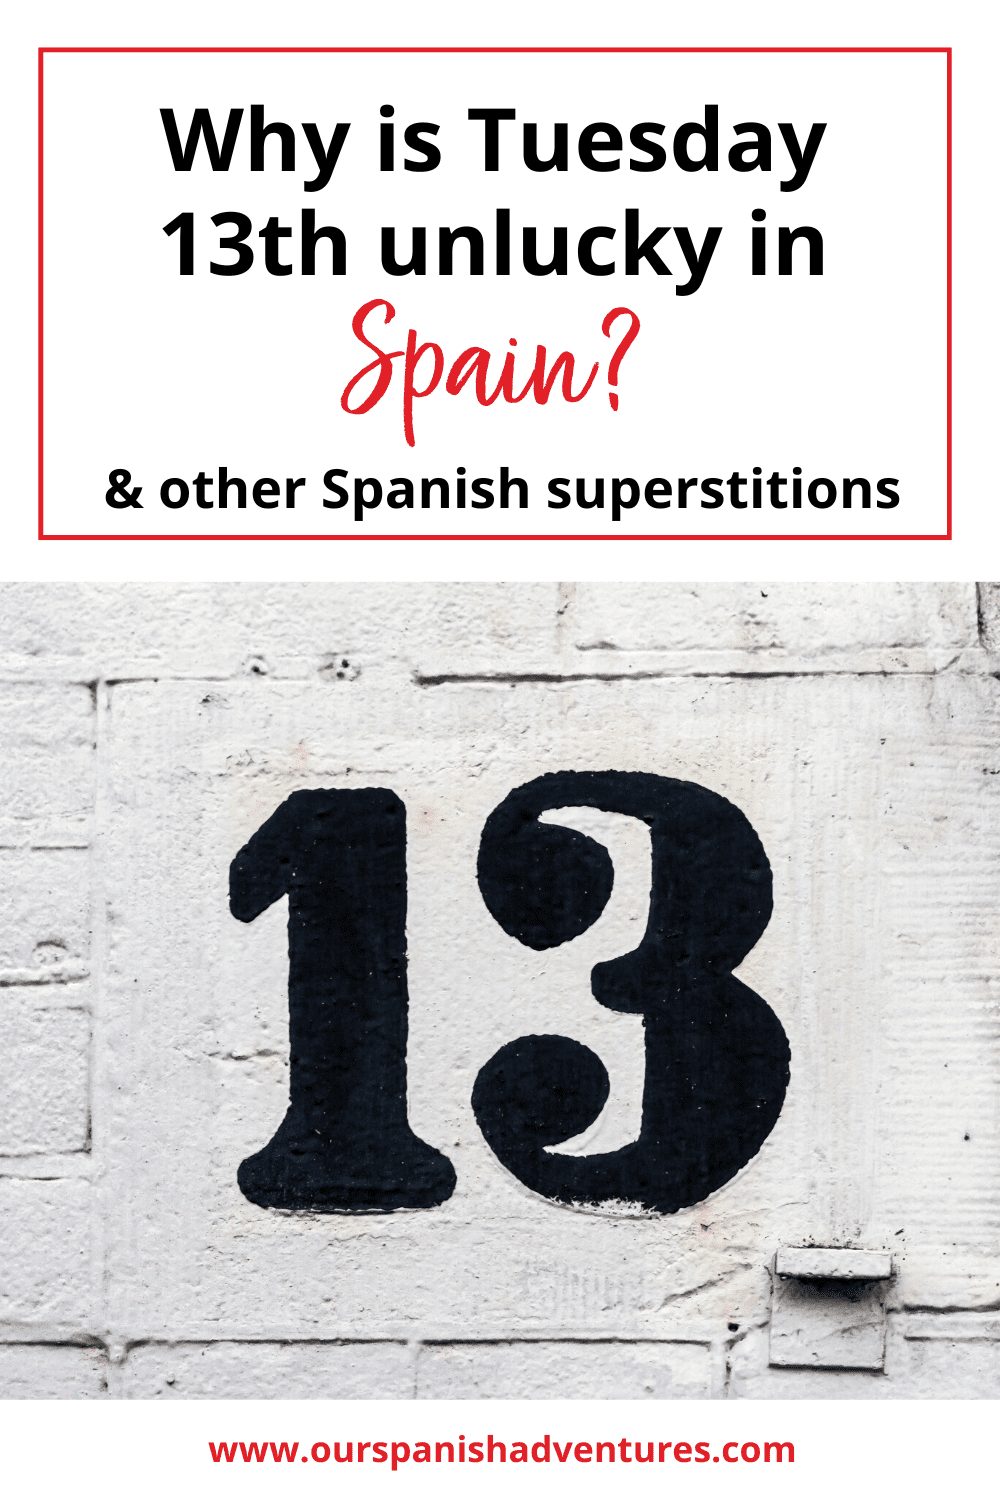 Why is Tuesday 13th unlucky in Spain? | Our Spanish Adventures